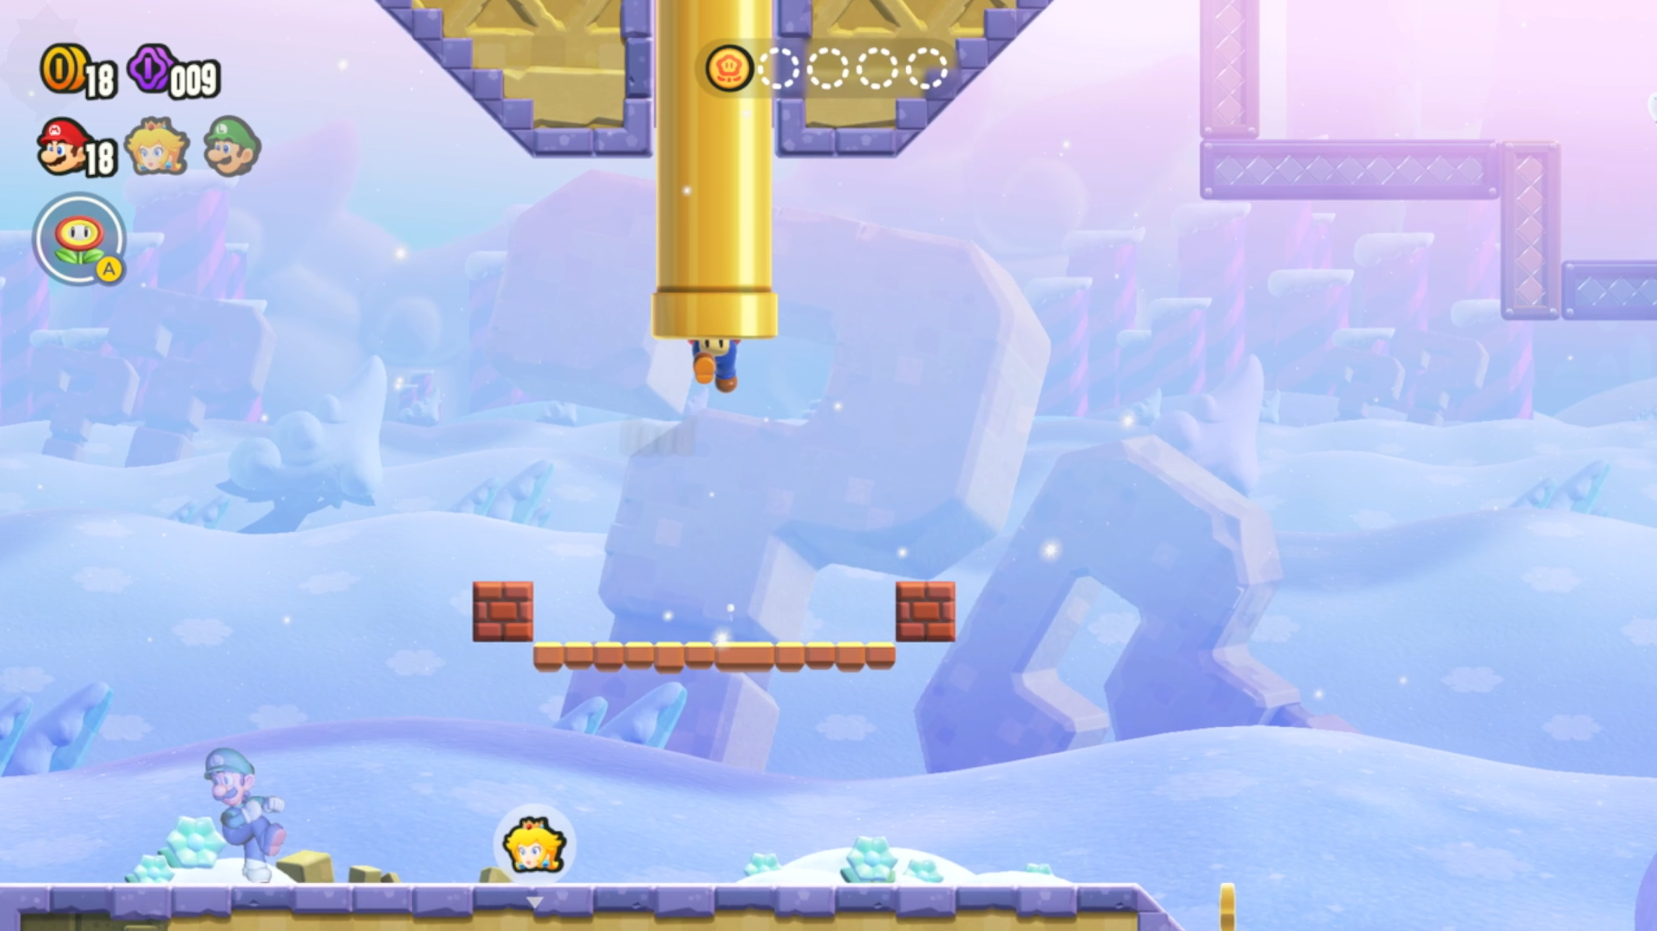 Mario jumps into an overhead pipe in Super Mario Wonder.